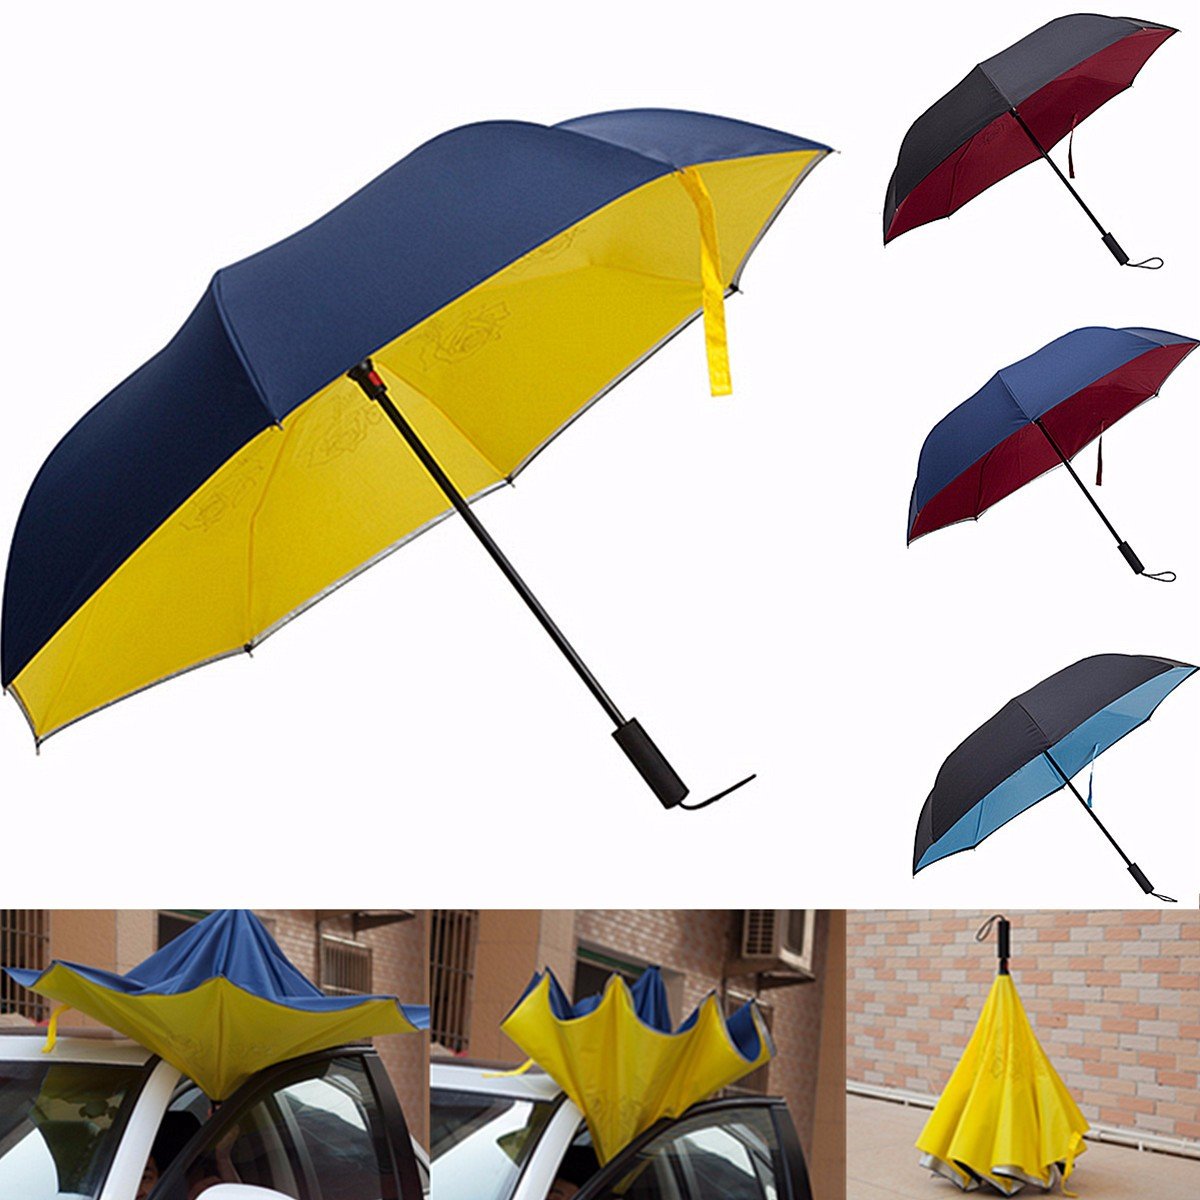 

Reverse Double Layer Foldable Umbrella Damp Proof wind Resistant Standing Rain Gear, Black/red/green black/red/blue black/green/red black/white